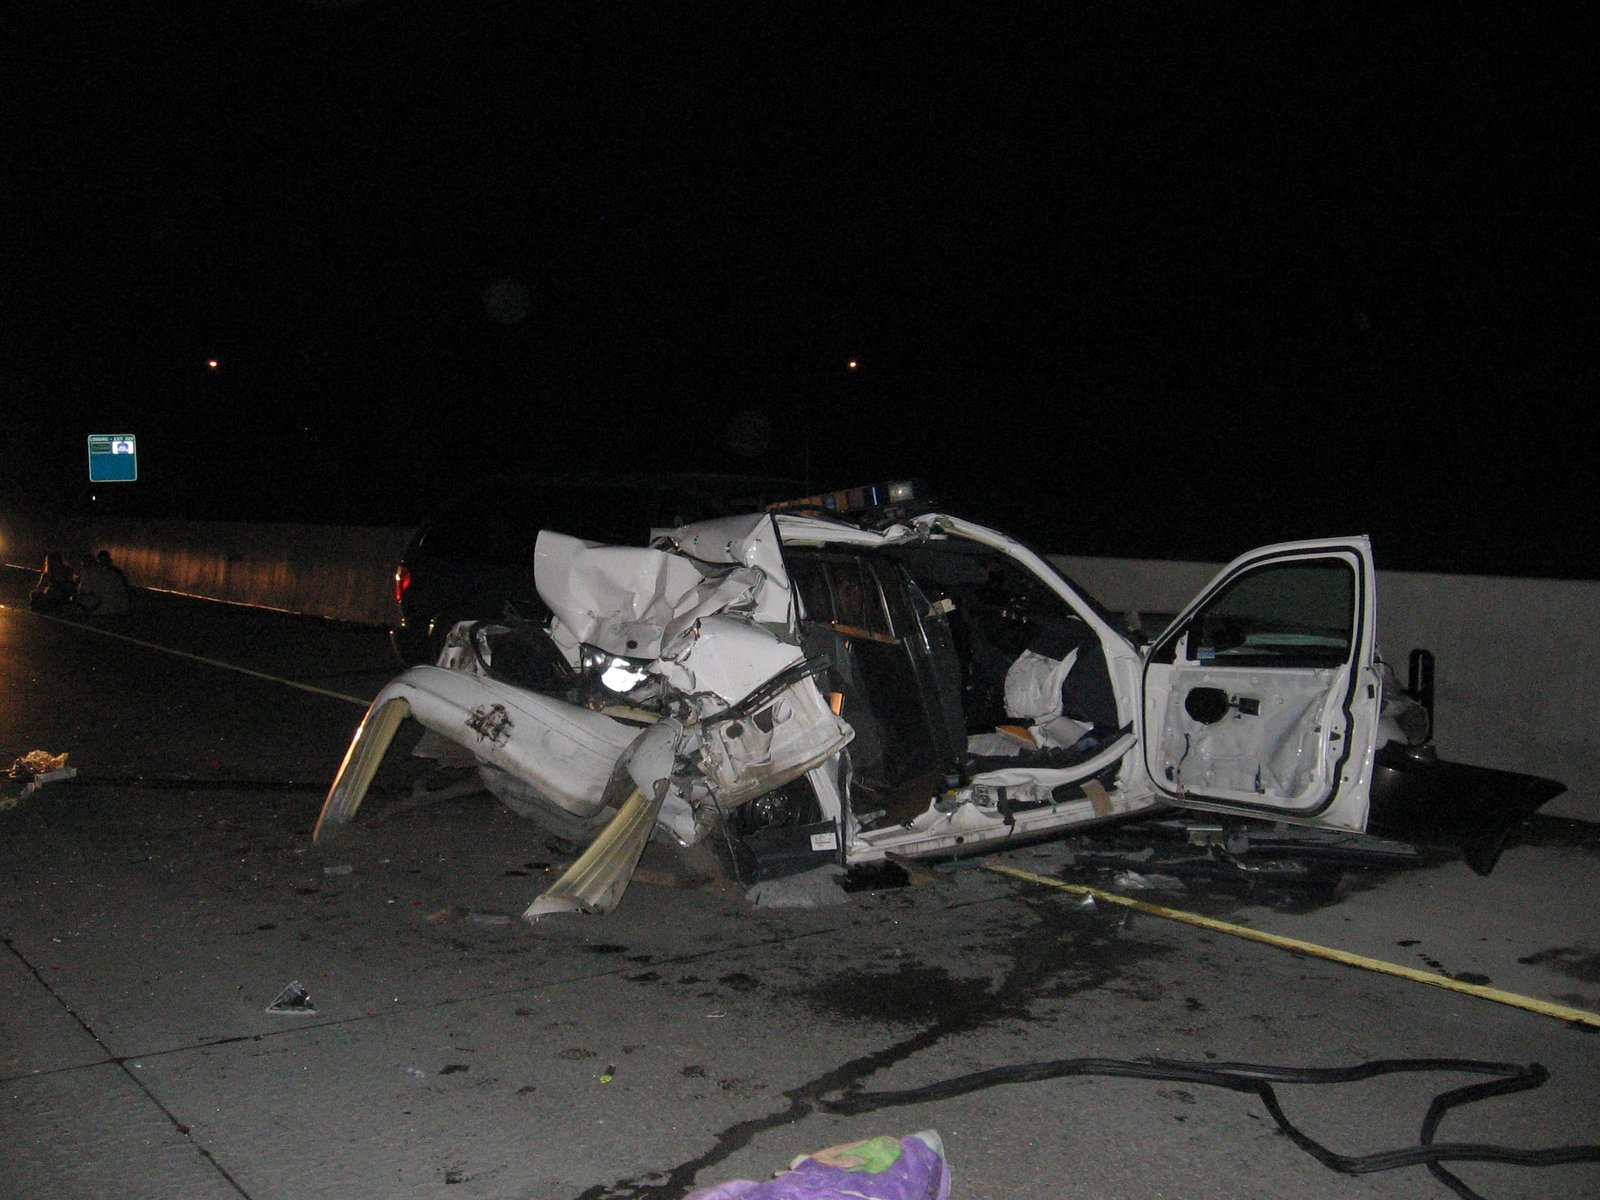 My uncle's WSP car after he got hit by a drunk driver